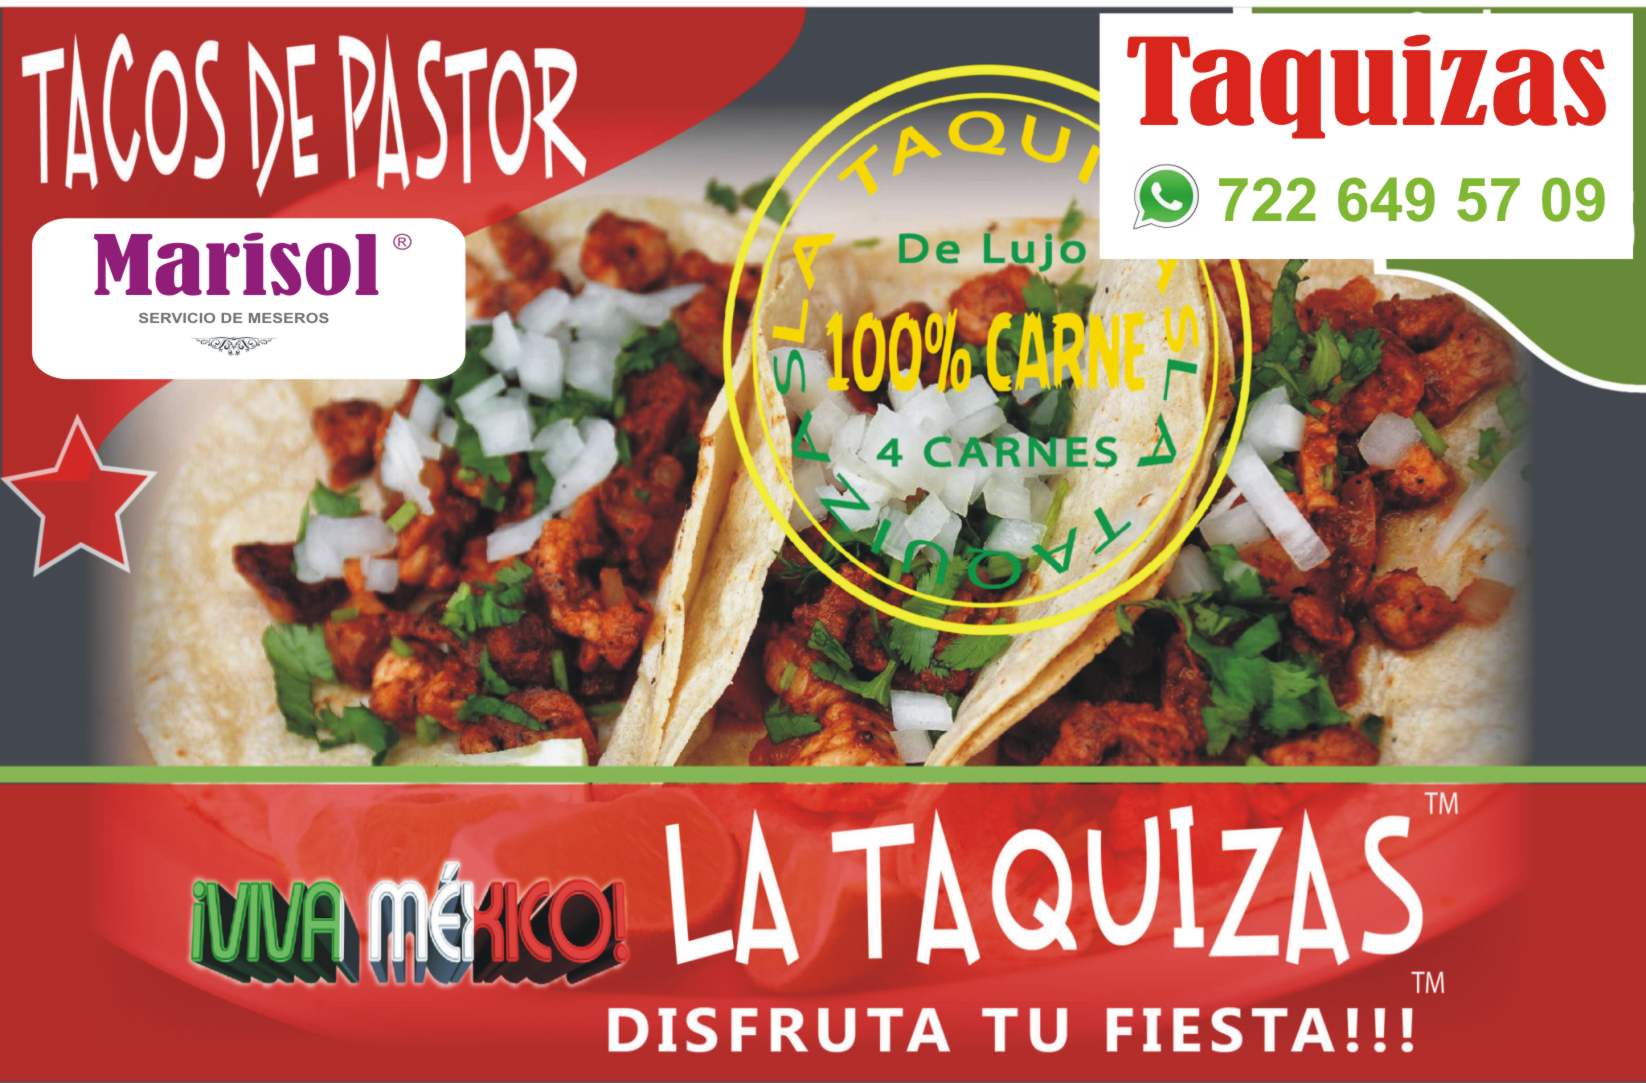 taquizas business cards 2